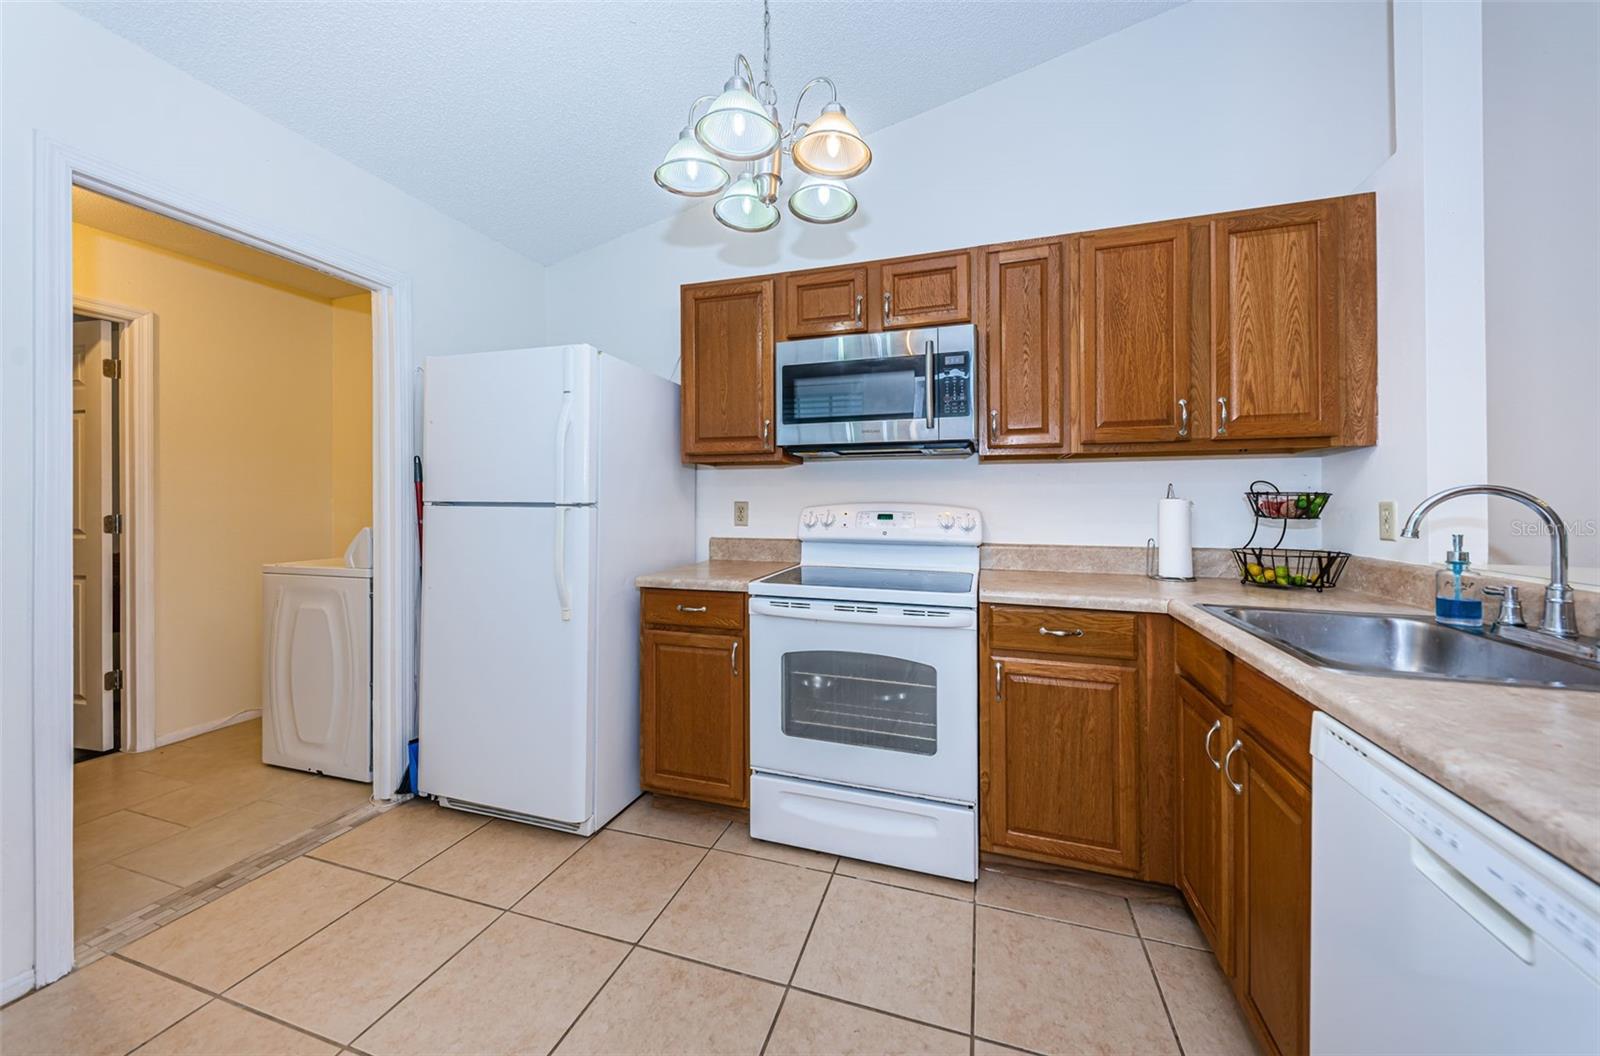 Kitchen to Laundry Room